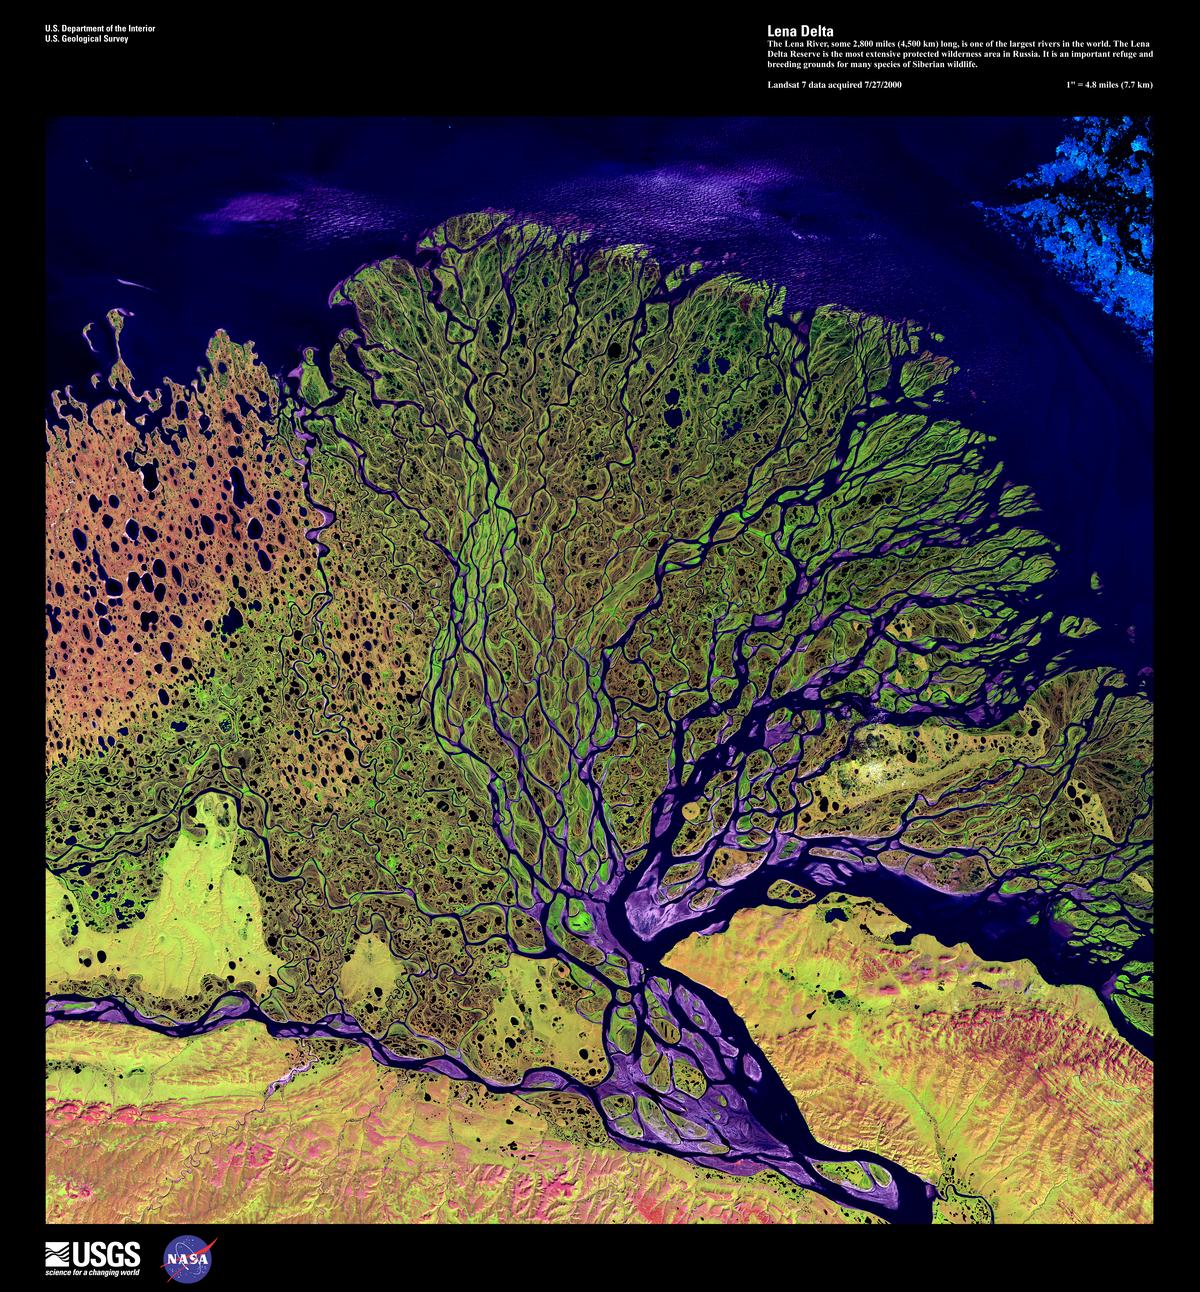 Image of the Week - Lena Delta